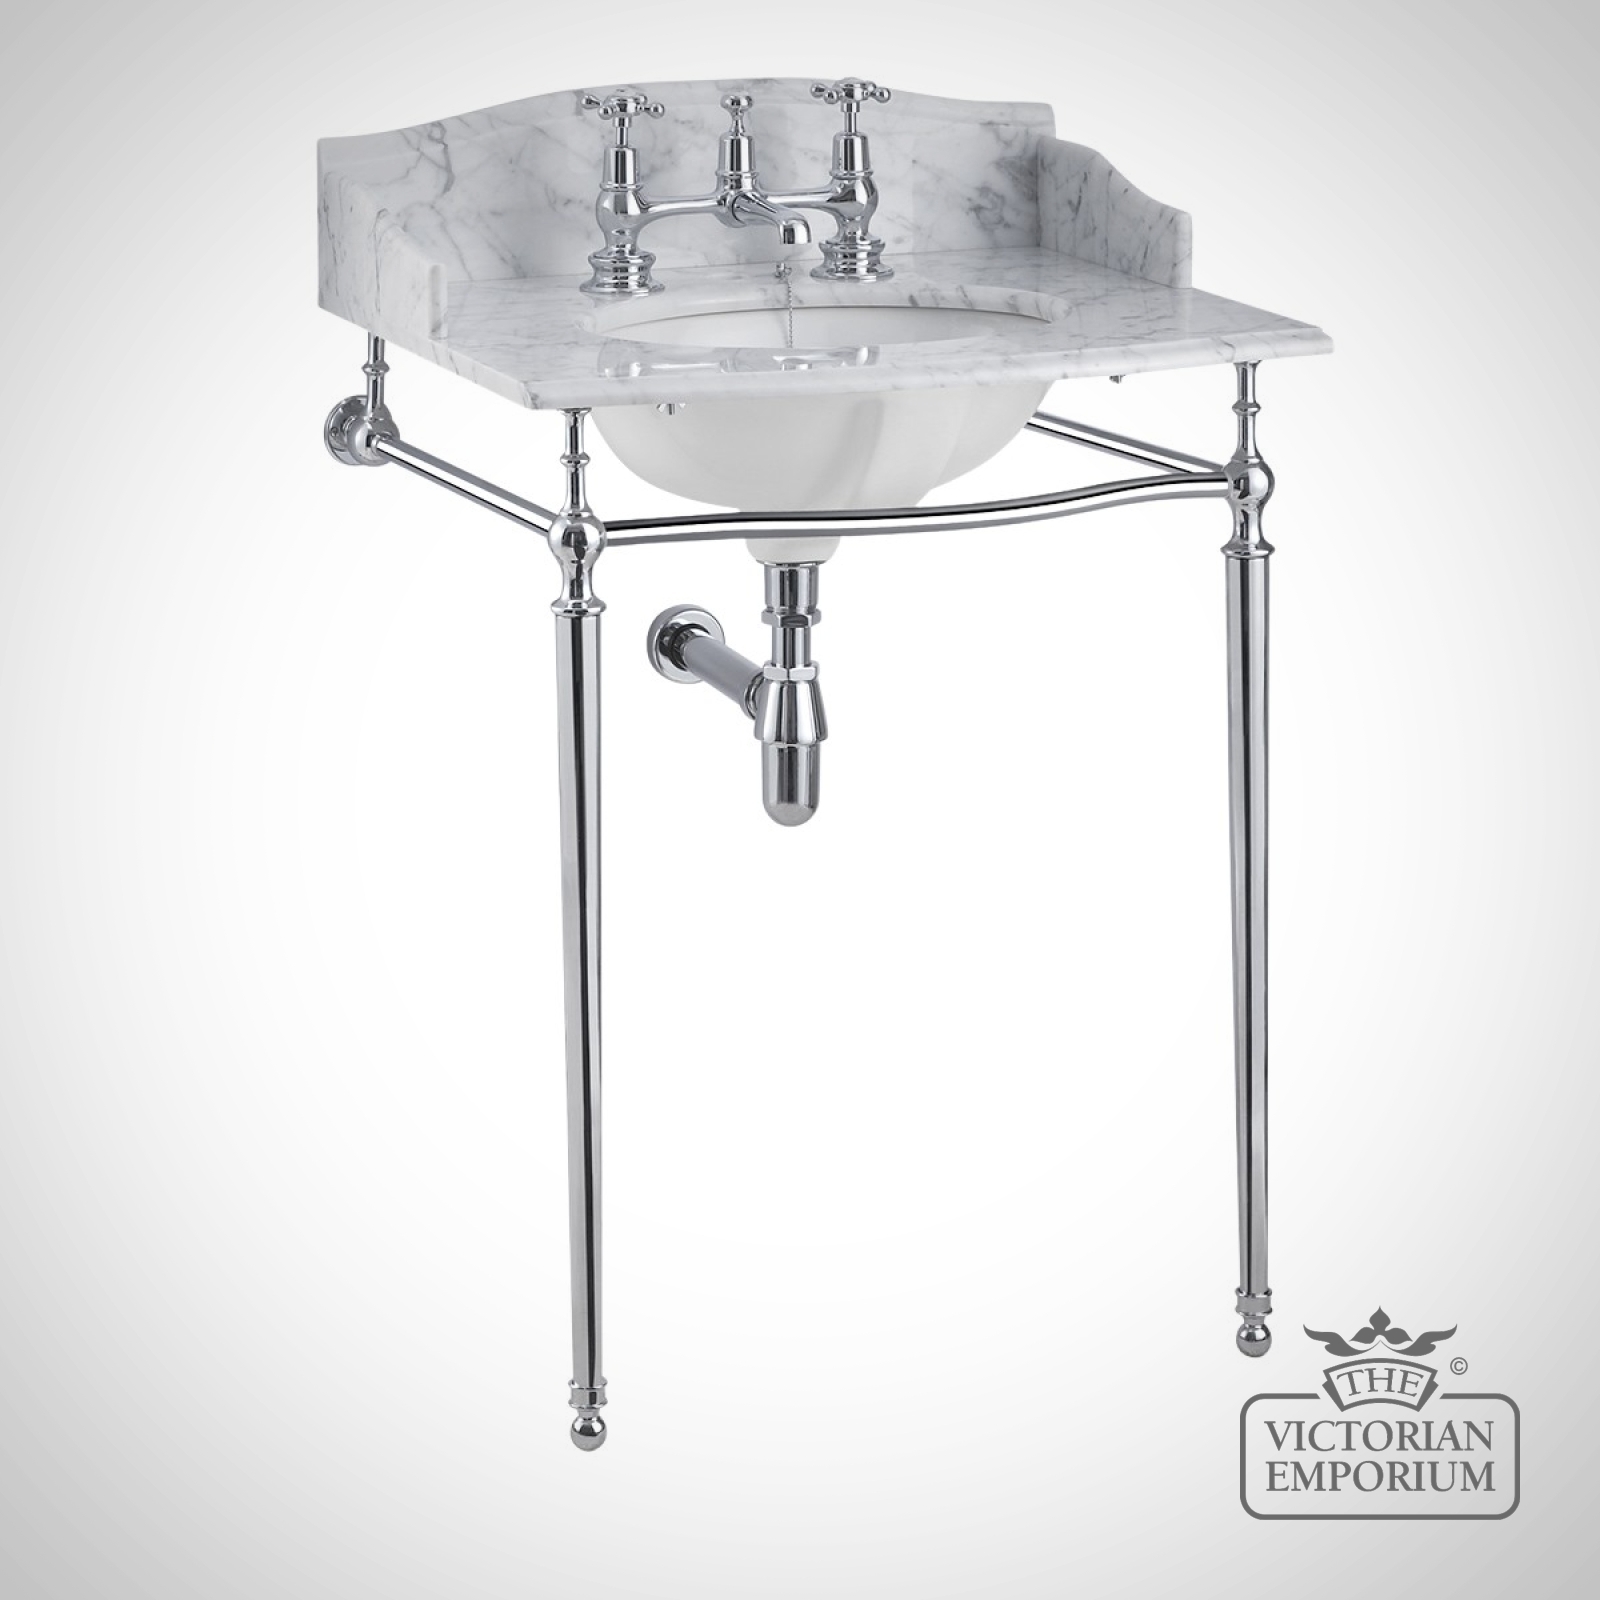 Classic Georgian style marble washstand top with inset basin and simple chrome stand